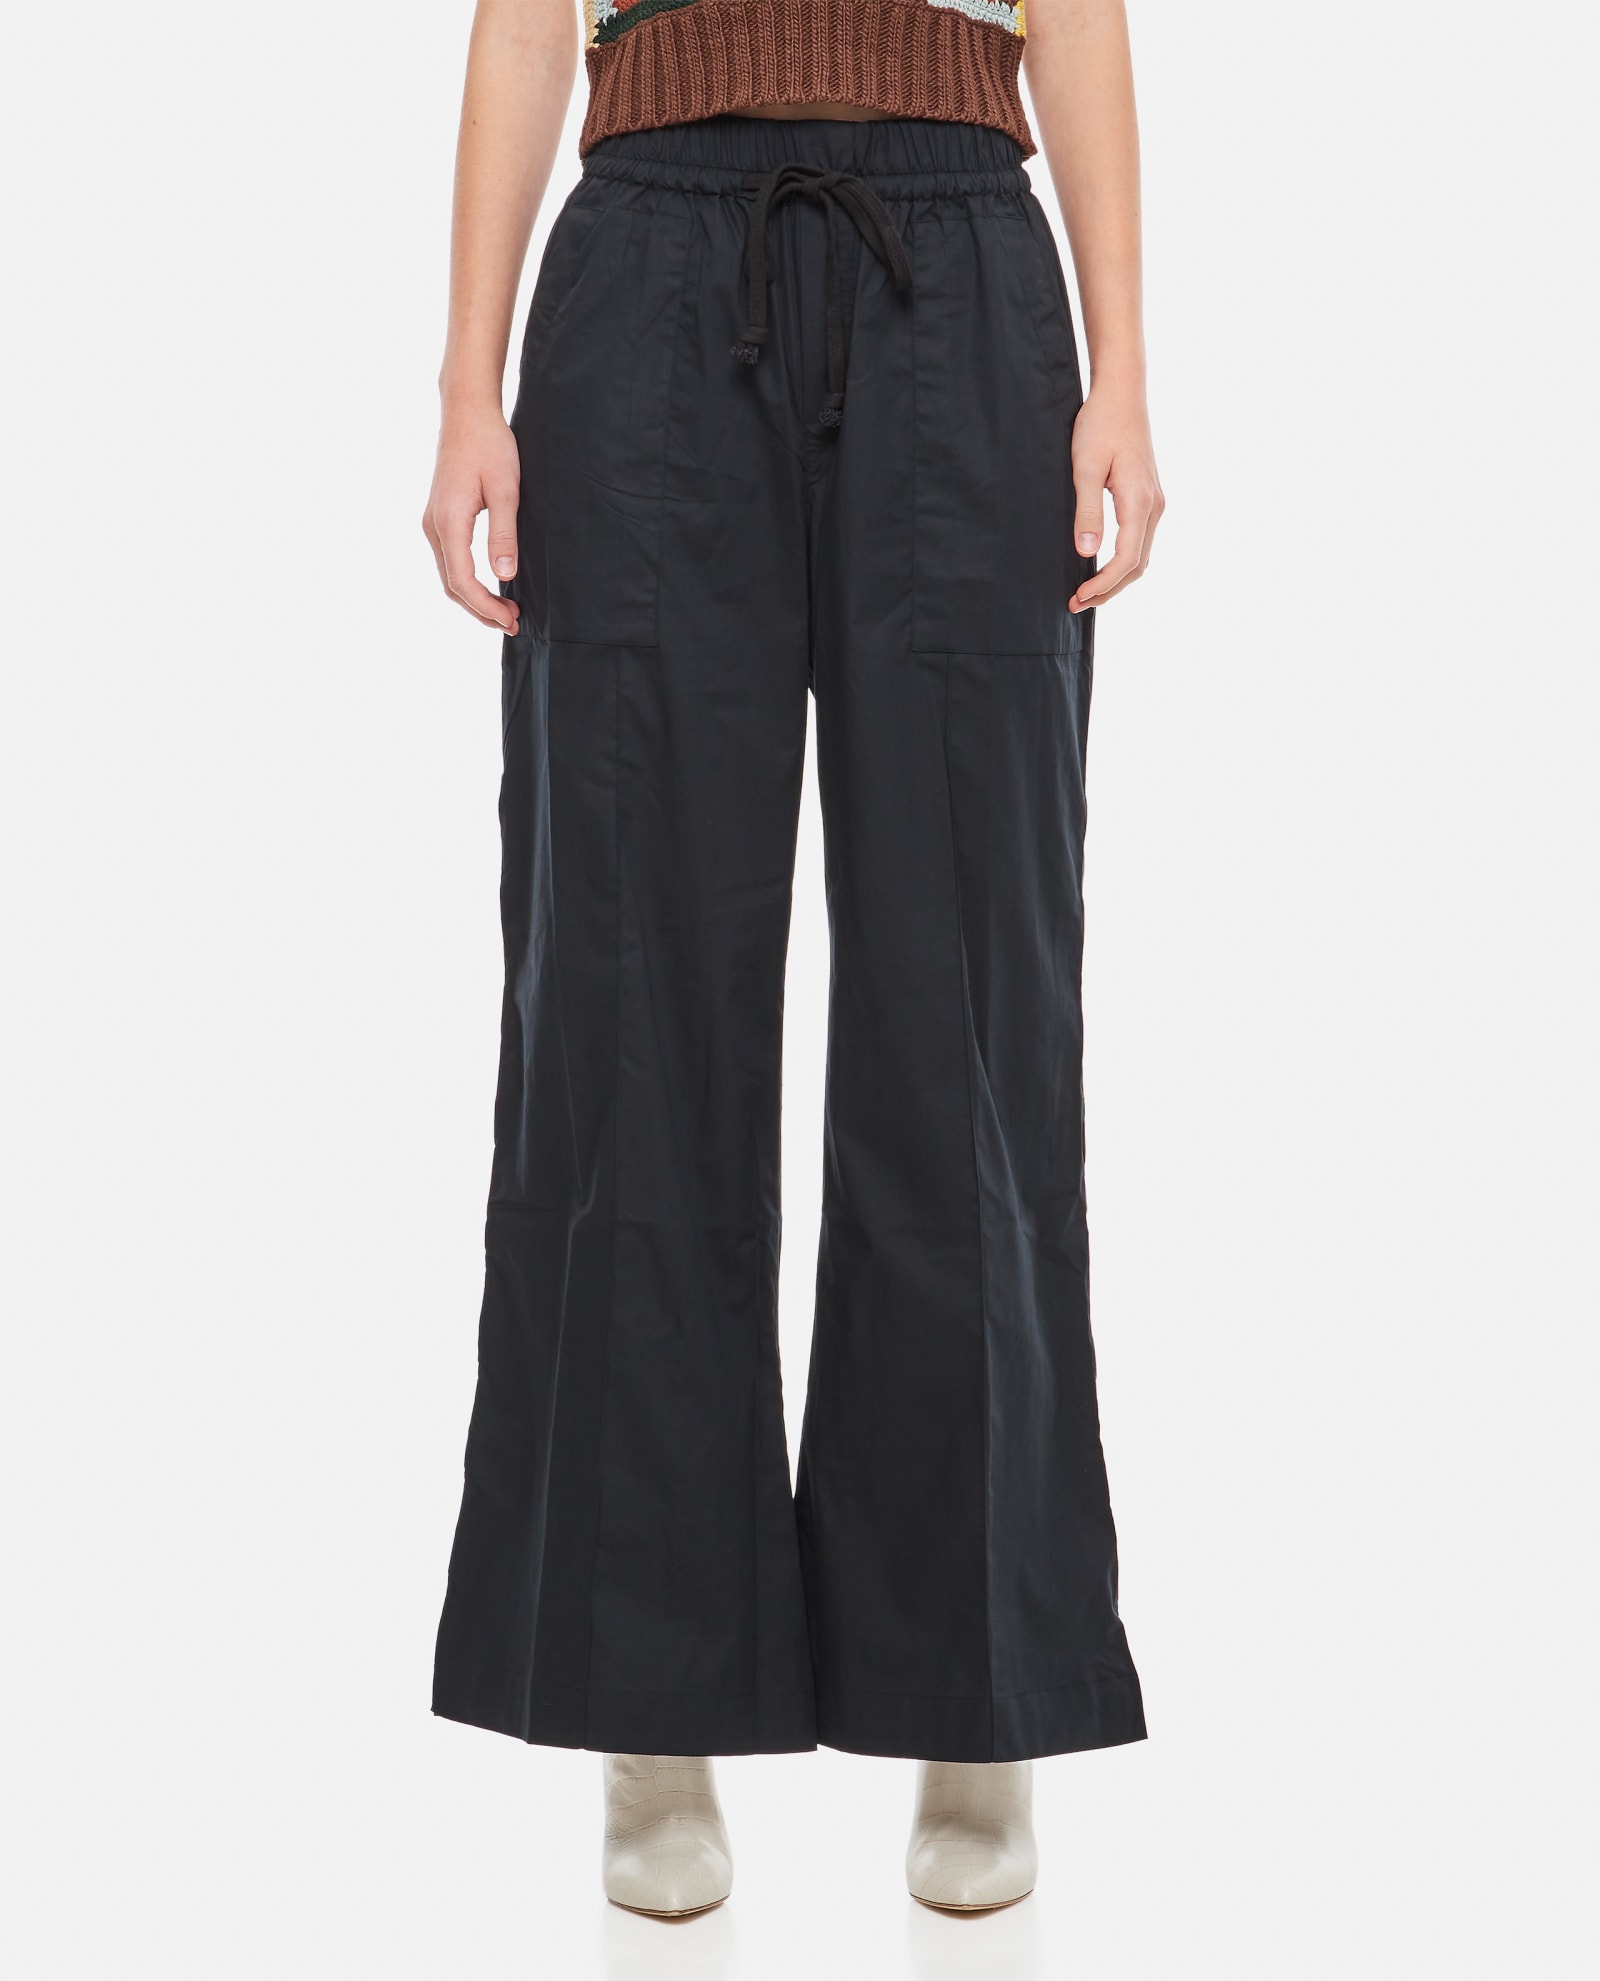 Sia Solid Side Cut-out Pants